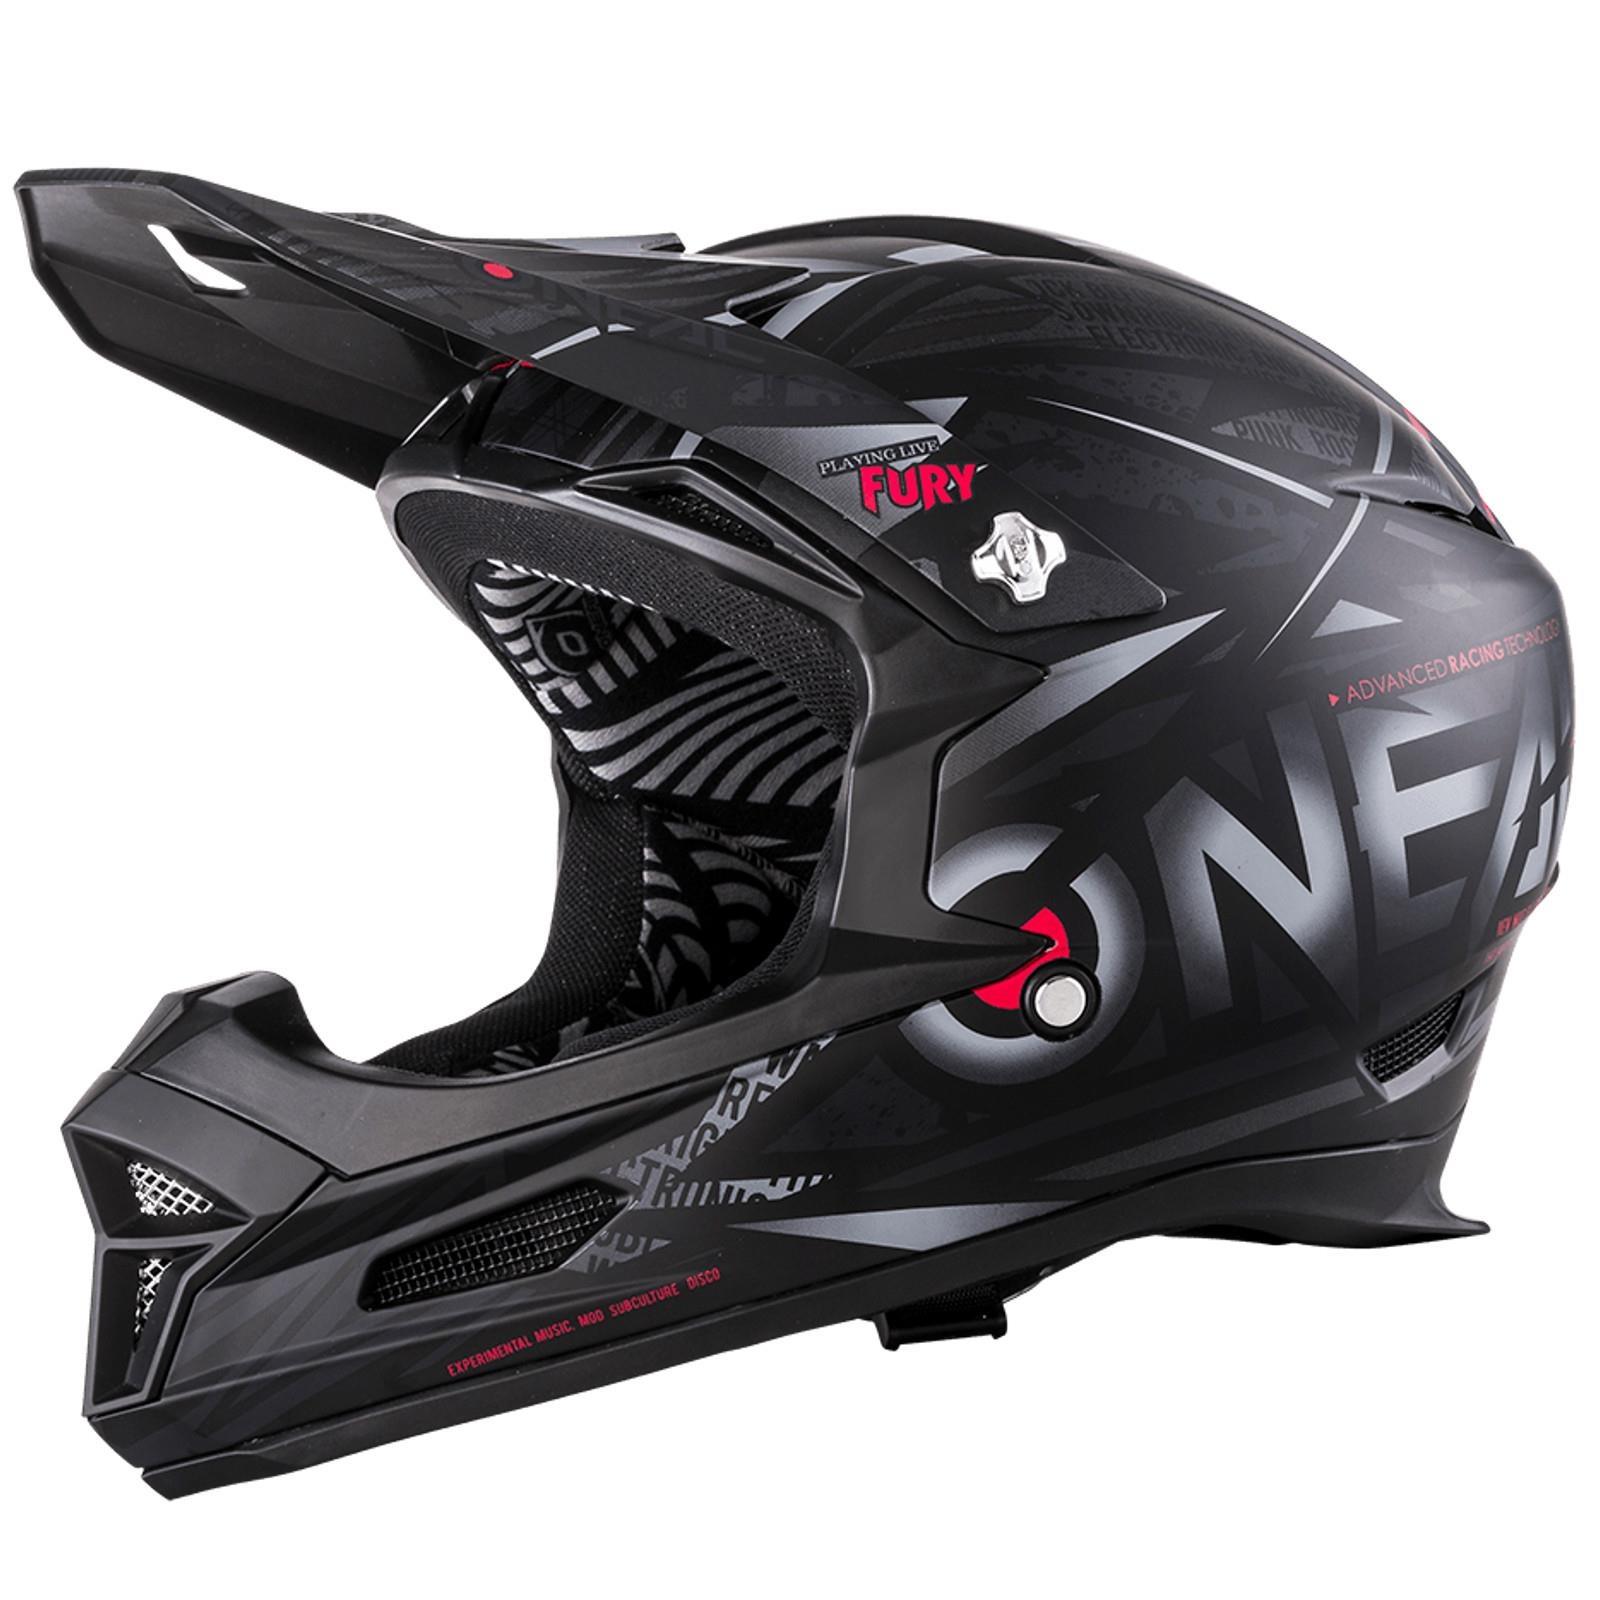 ONeal Fury RL Helm Afterburner Action Cam MTB Fullface DH Mountainbike Fahrrad 